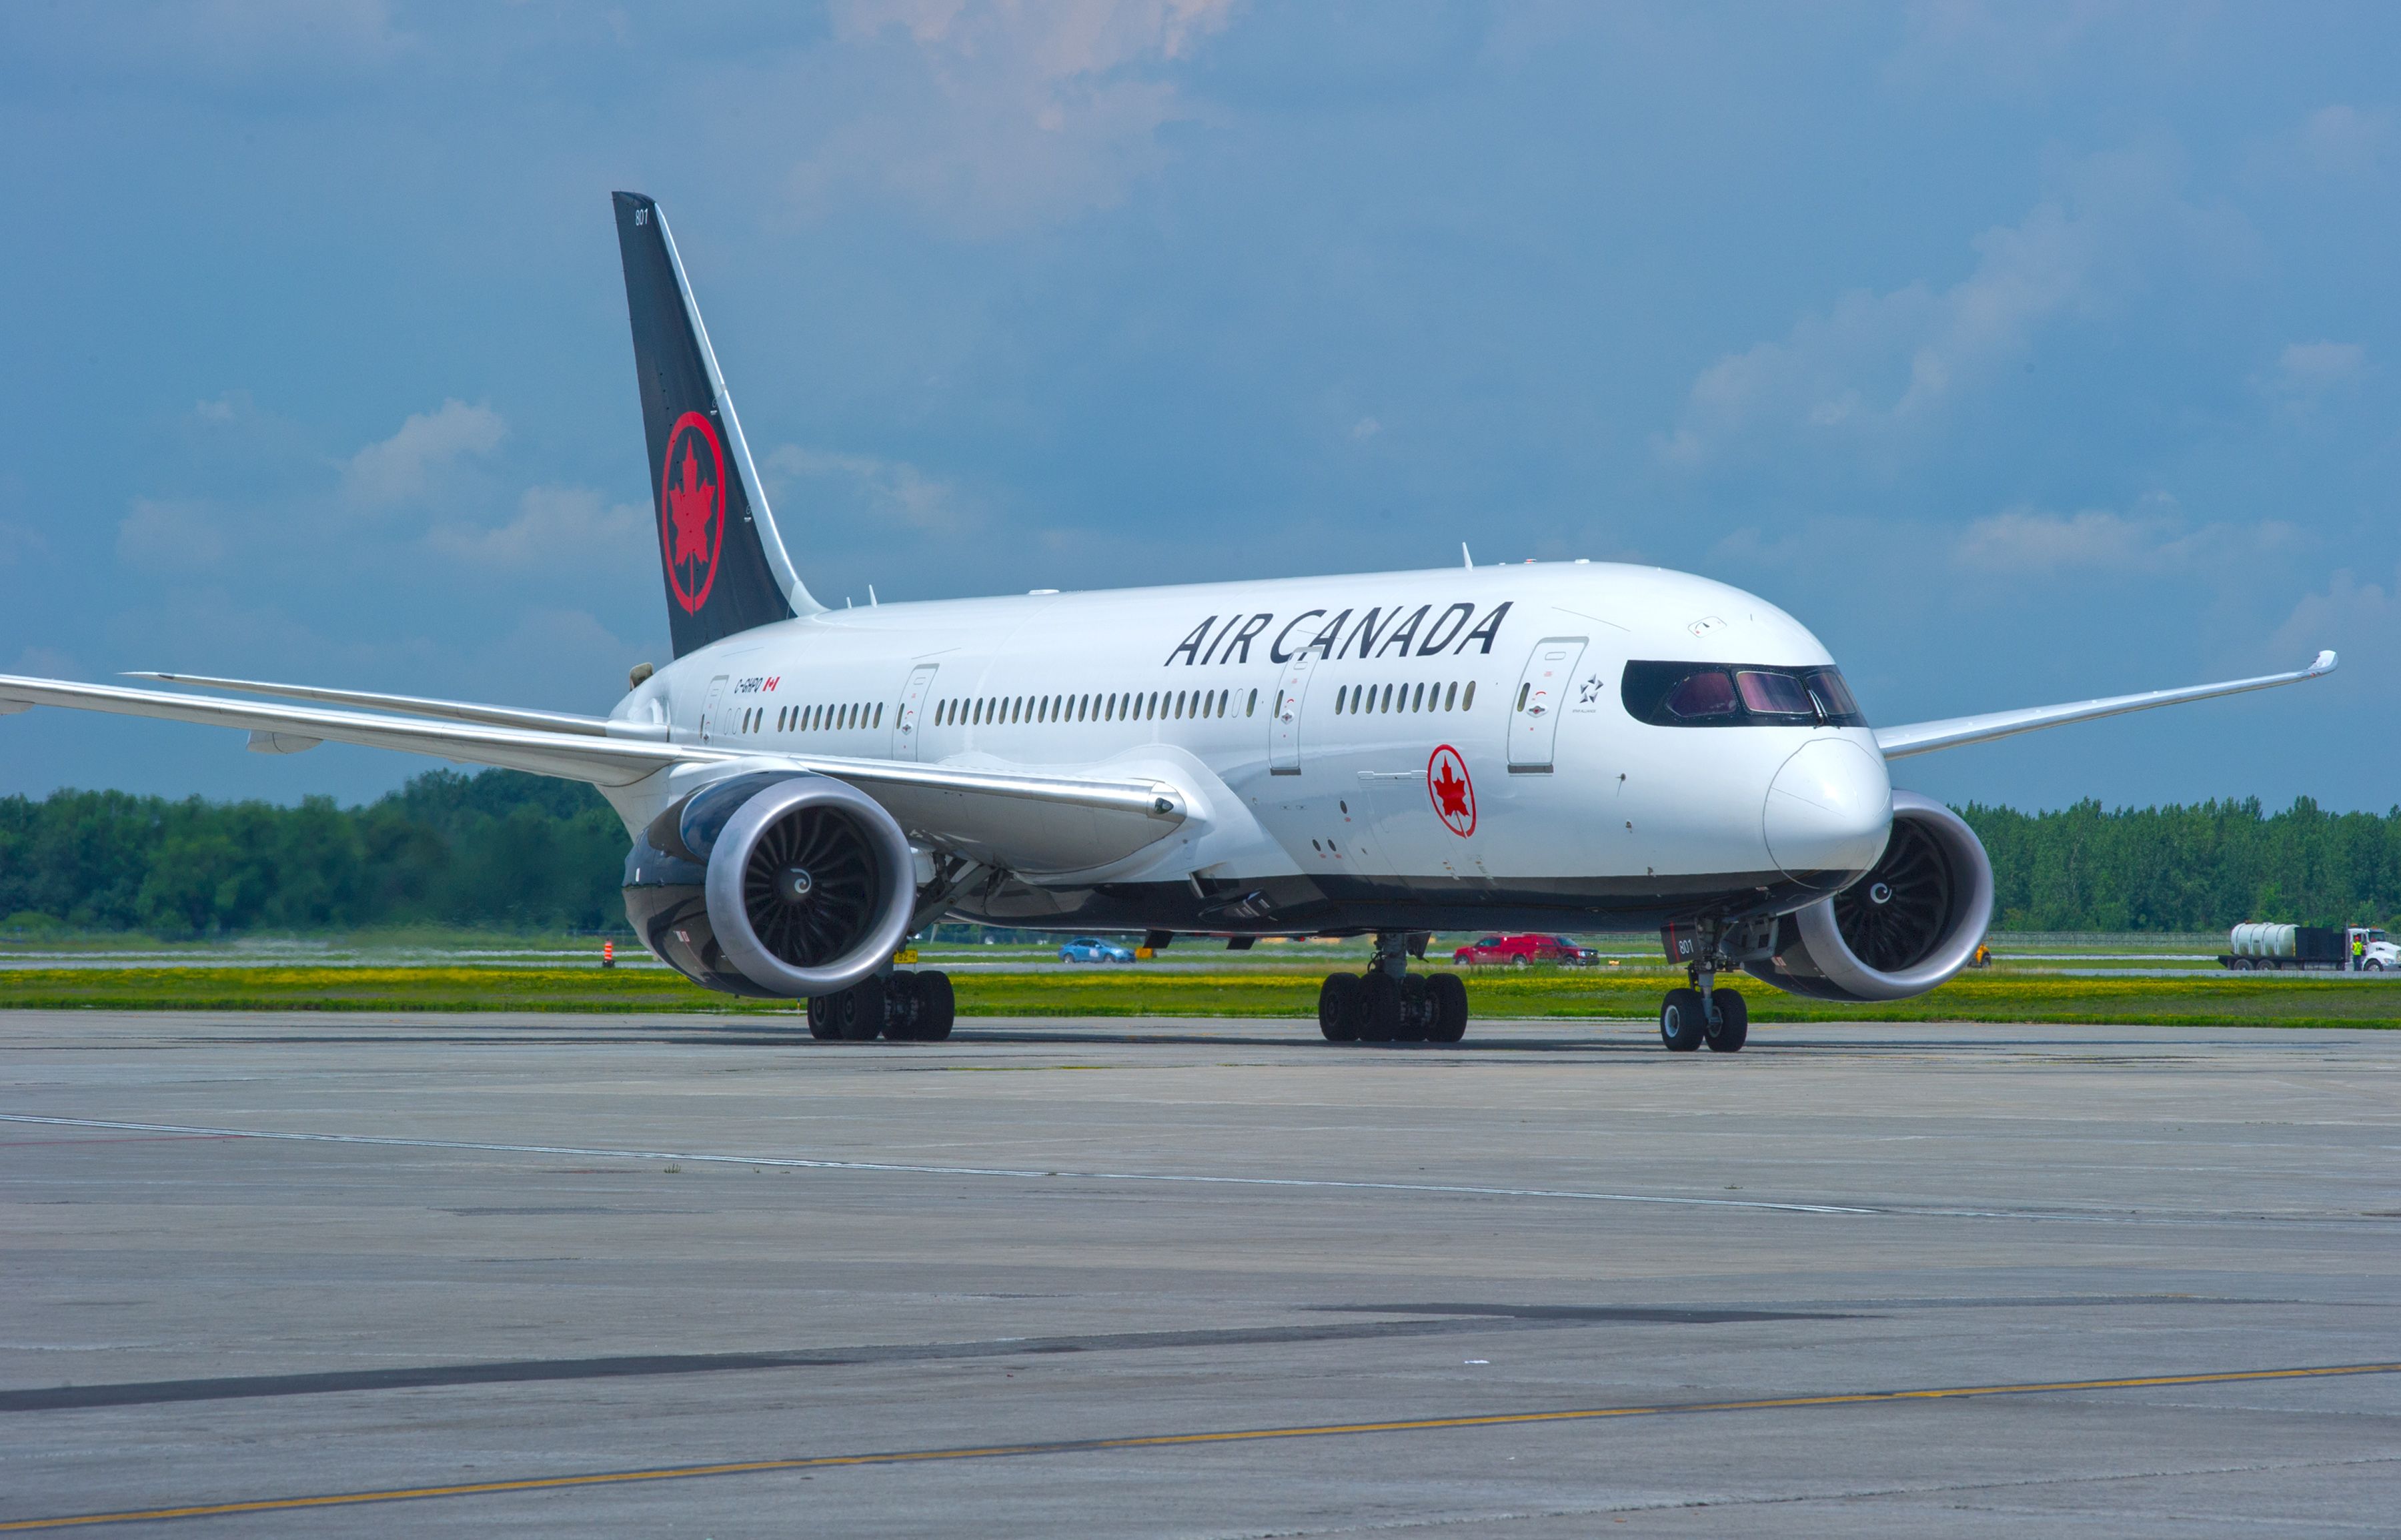 Air Canada Focused On Strong Demand Despite $59m Losses in 1st Quarter